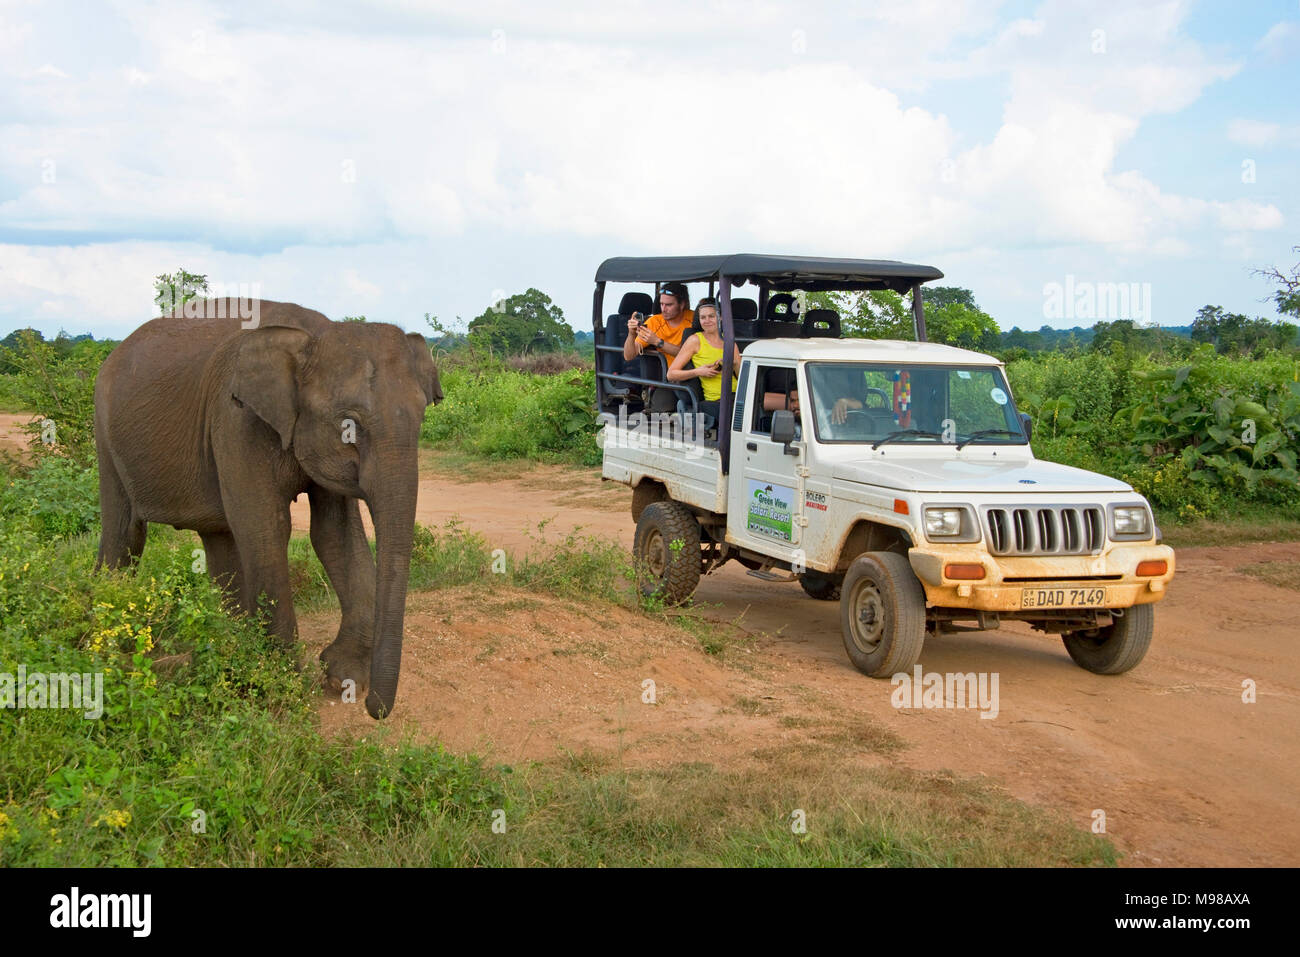 A Sri Lankan elephant crossing in front of a safari jeep with tourists visiting Udawalawe National Park in Sri Lanka. Stock Photo